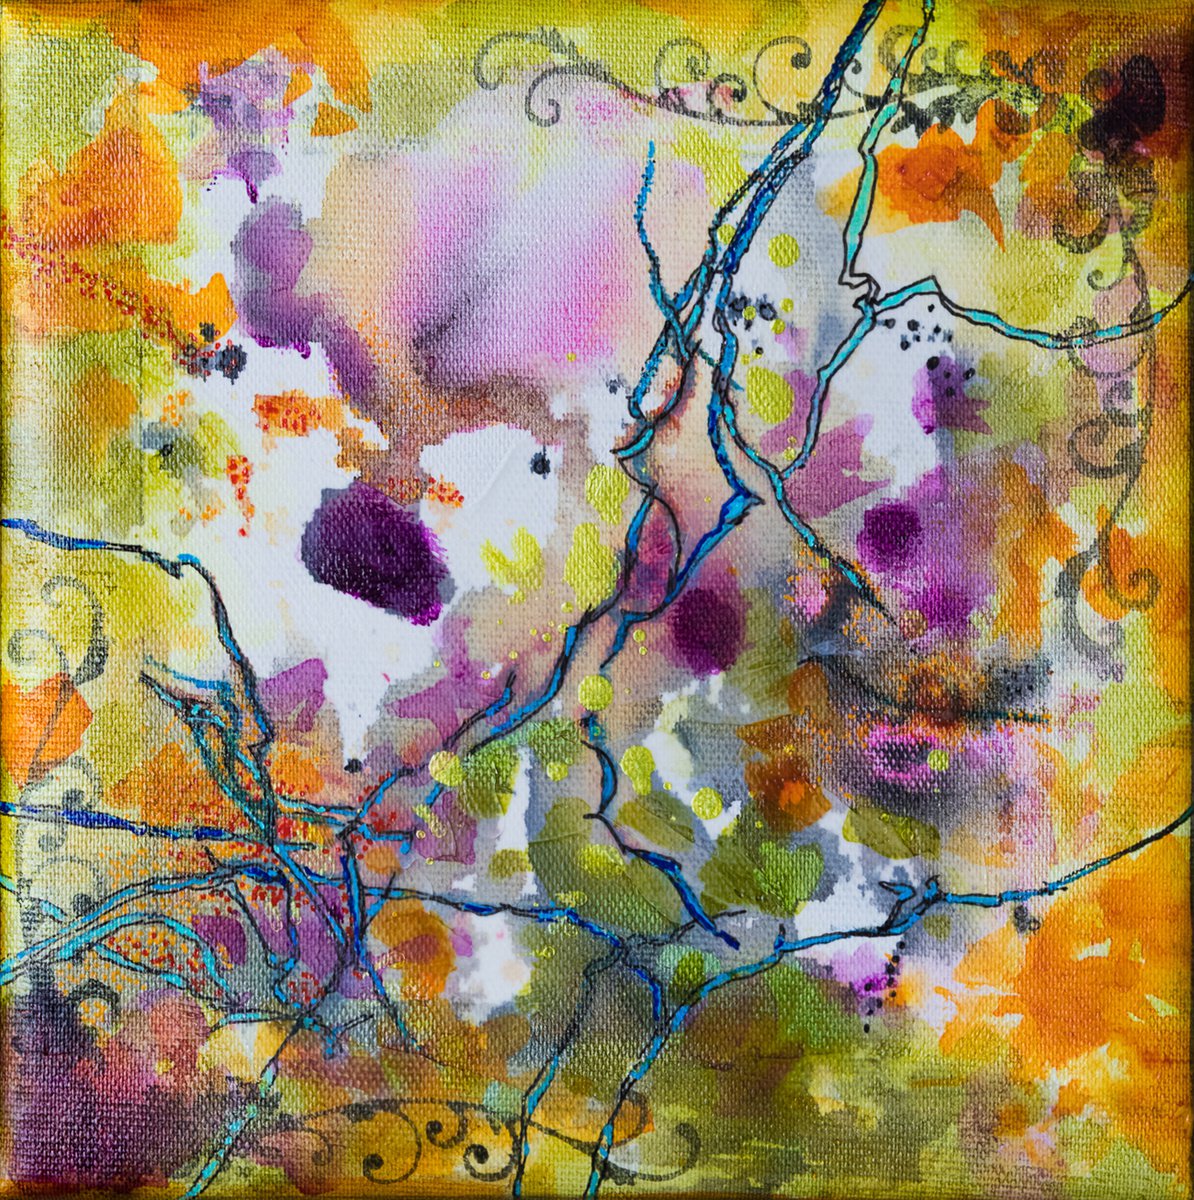 Orange ornament - small mixed media painting by Fabienne Monestier